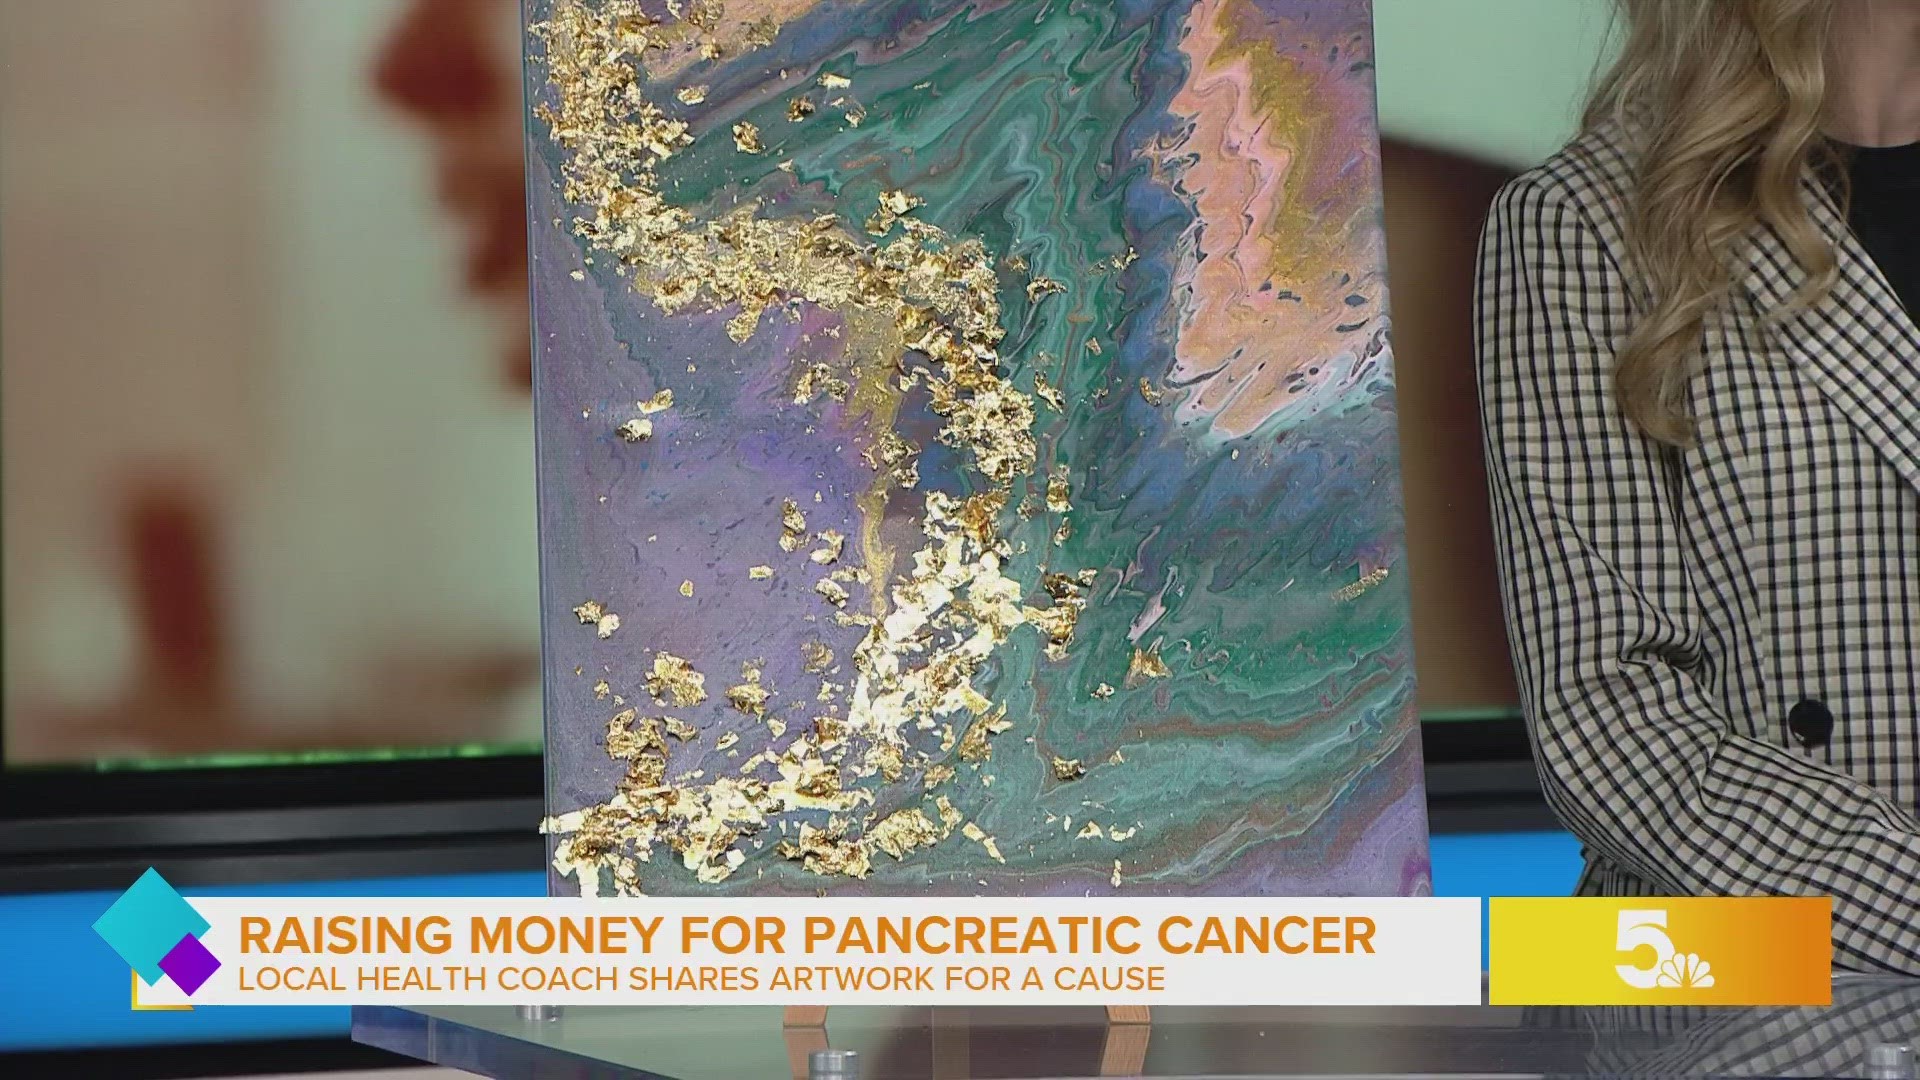 Kira found painting when her husband was first diagnosed with pancreatic cancer.